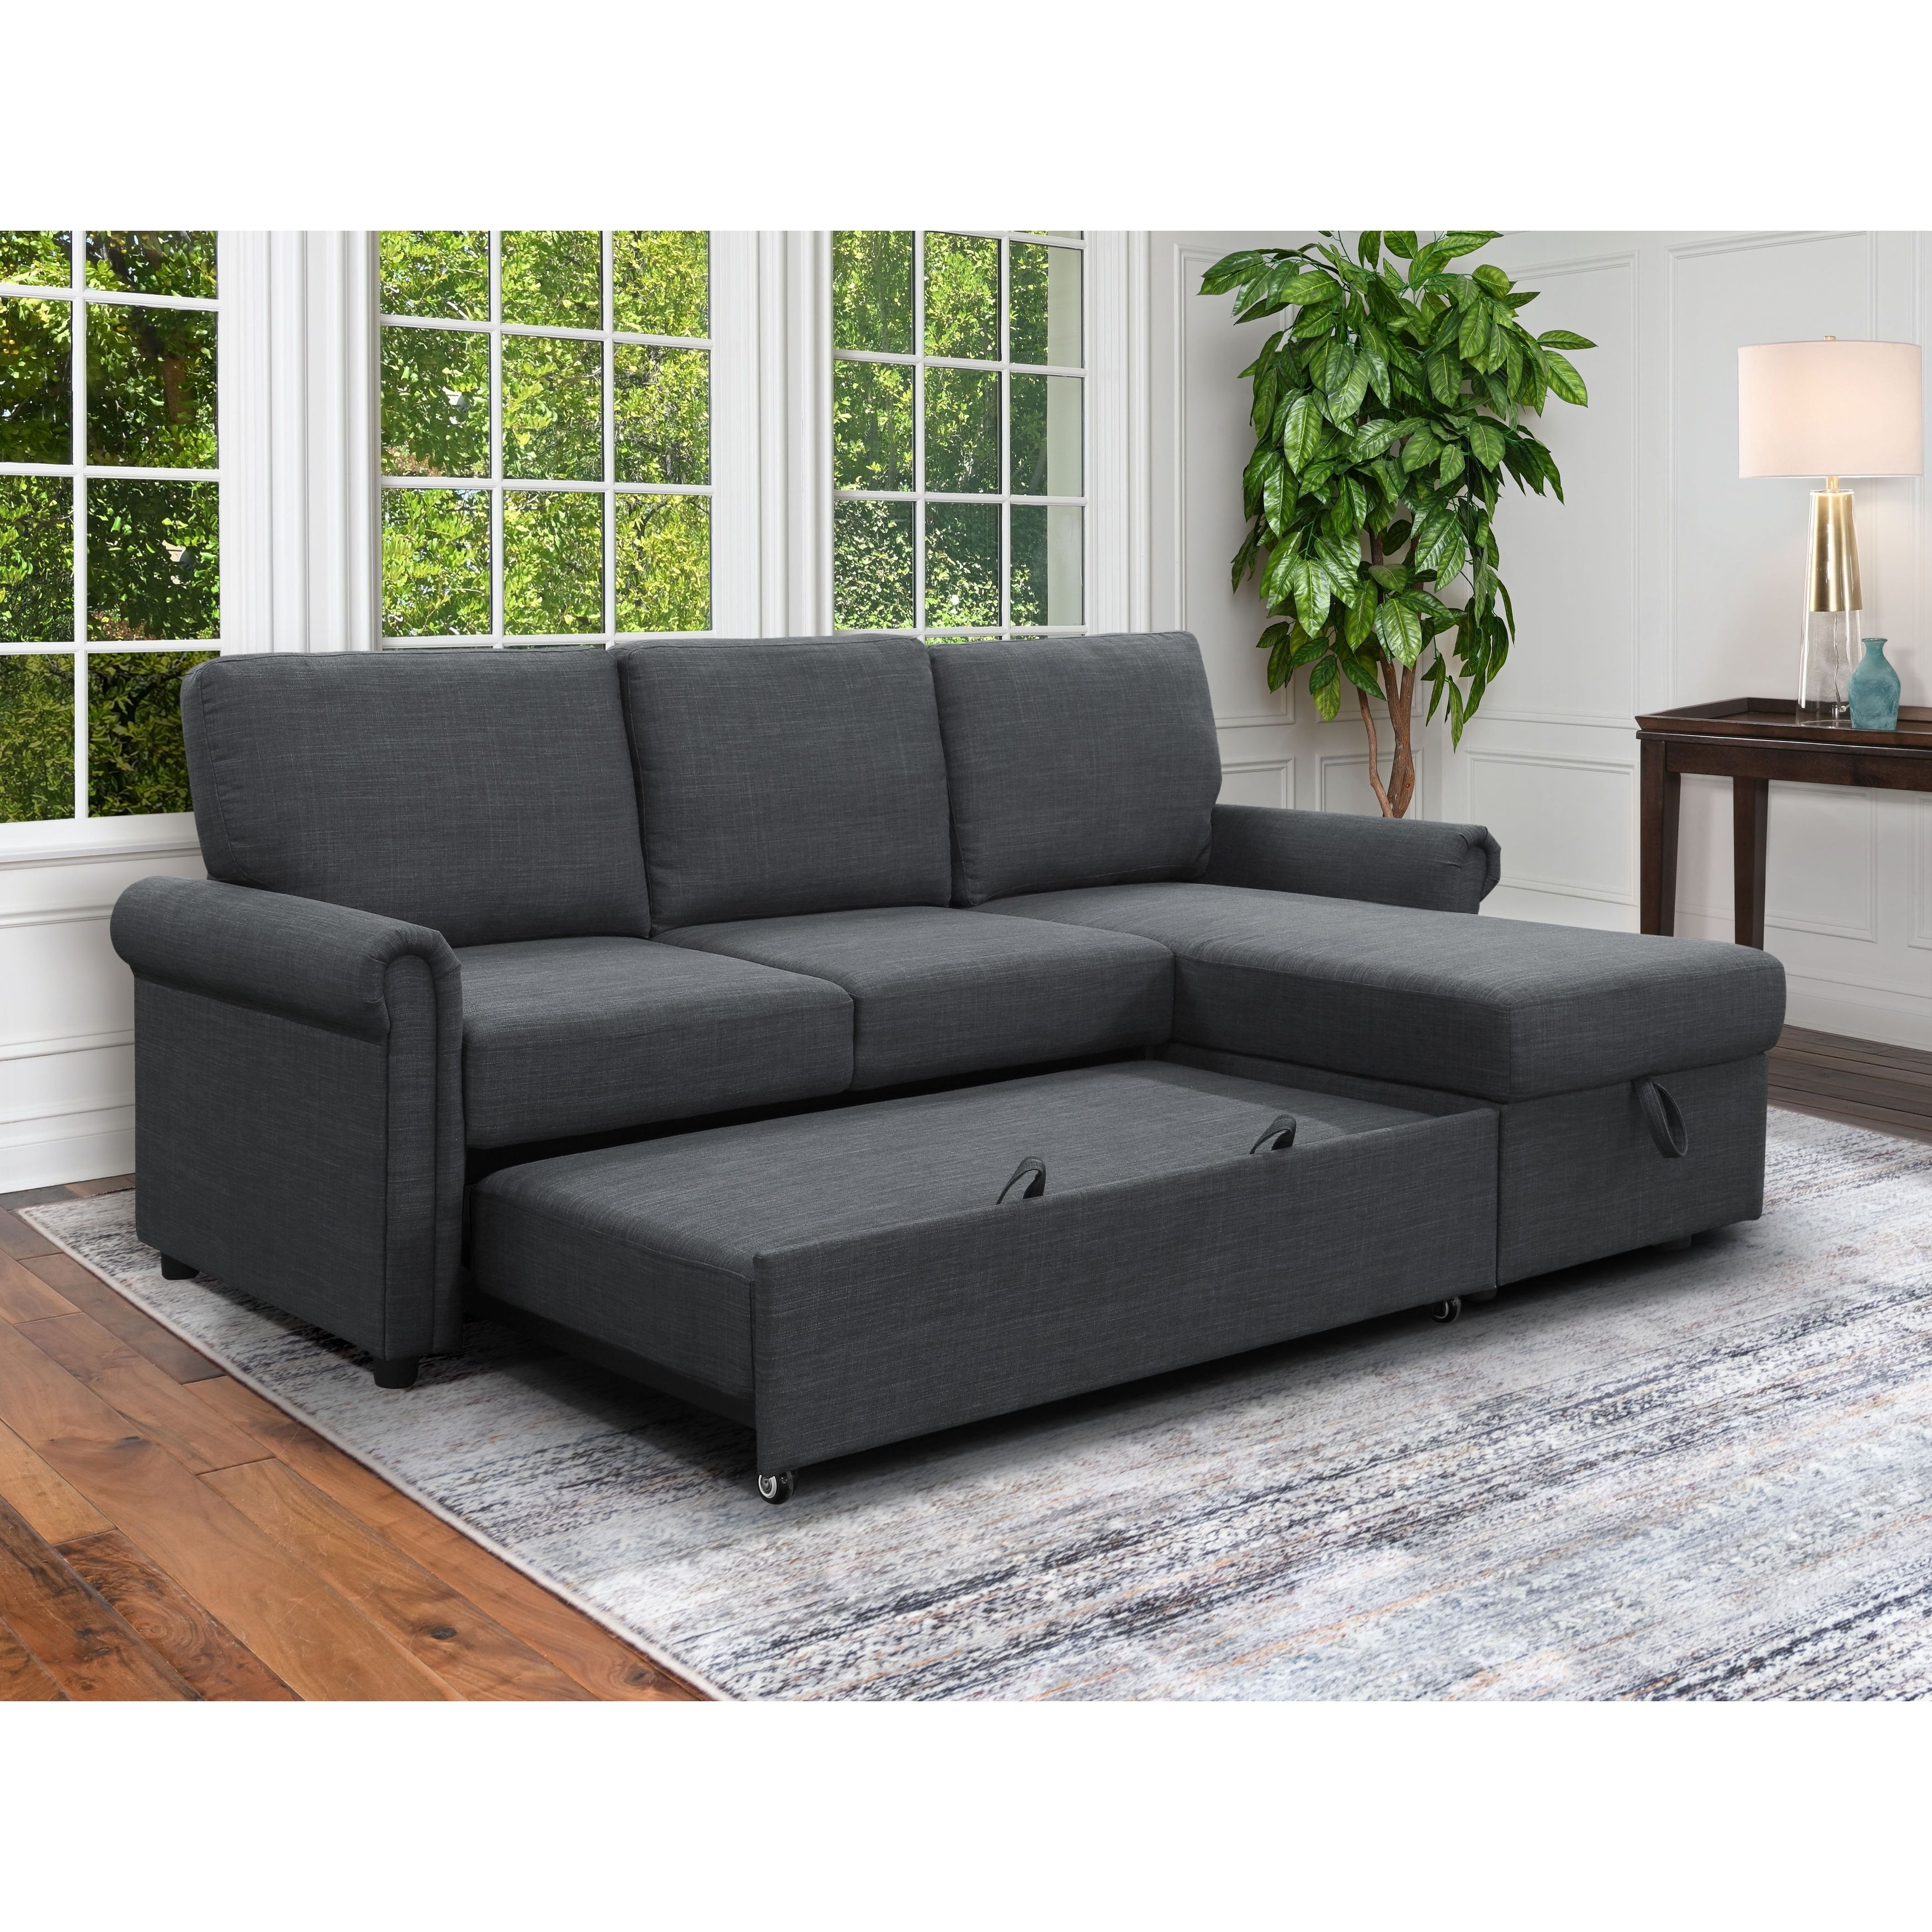 Abbyson Hamilton Reversible Fabric Sleeper Sectional With Storage – On Sale  – – 31997945 Within Sofa Sectionals With Storage (Gallery 7 of 20)